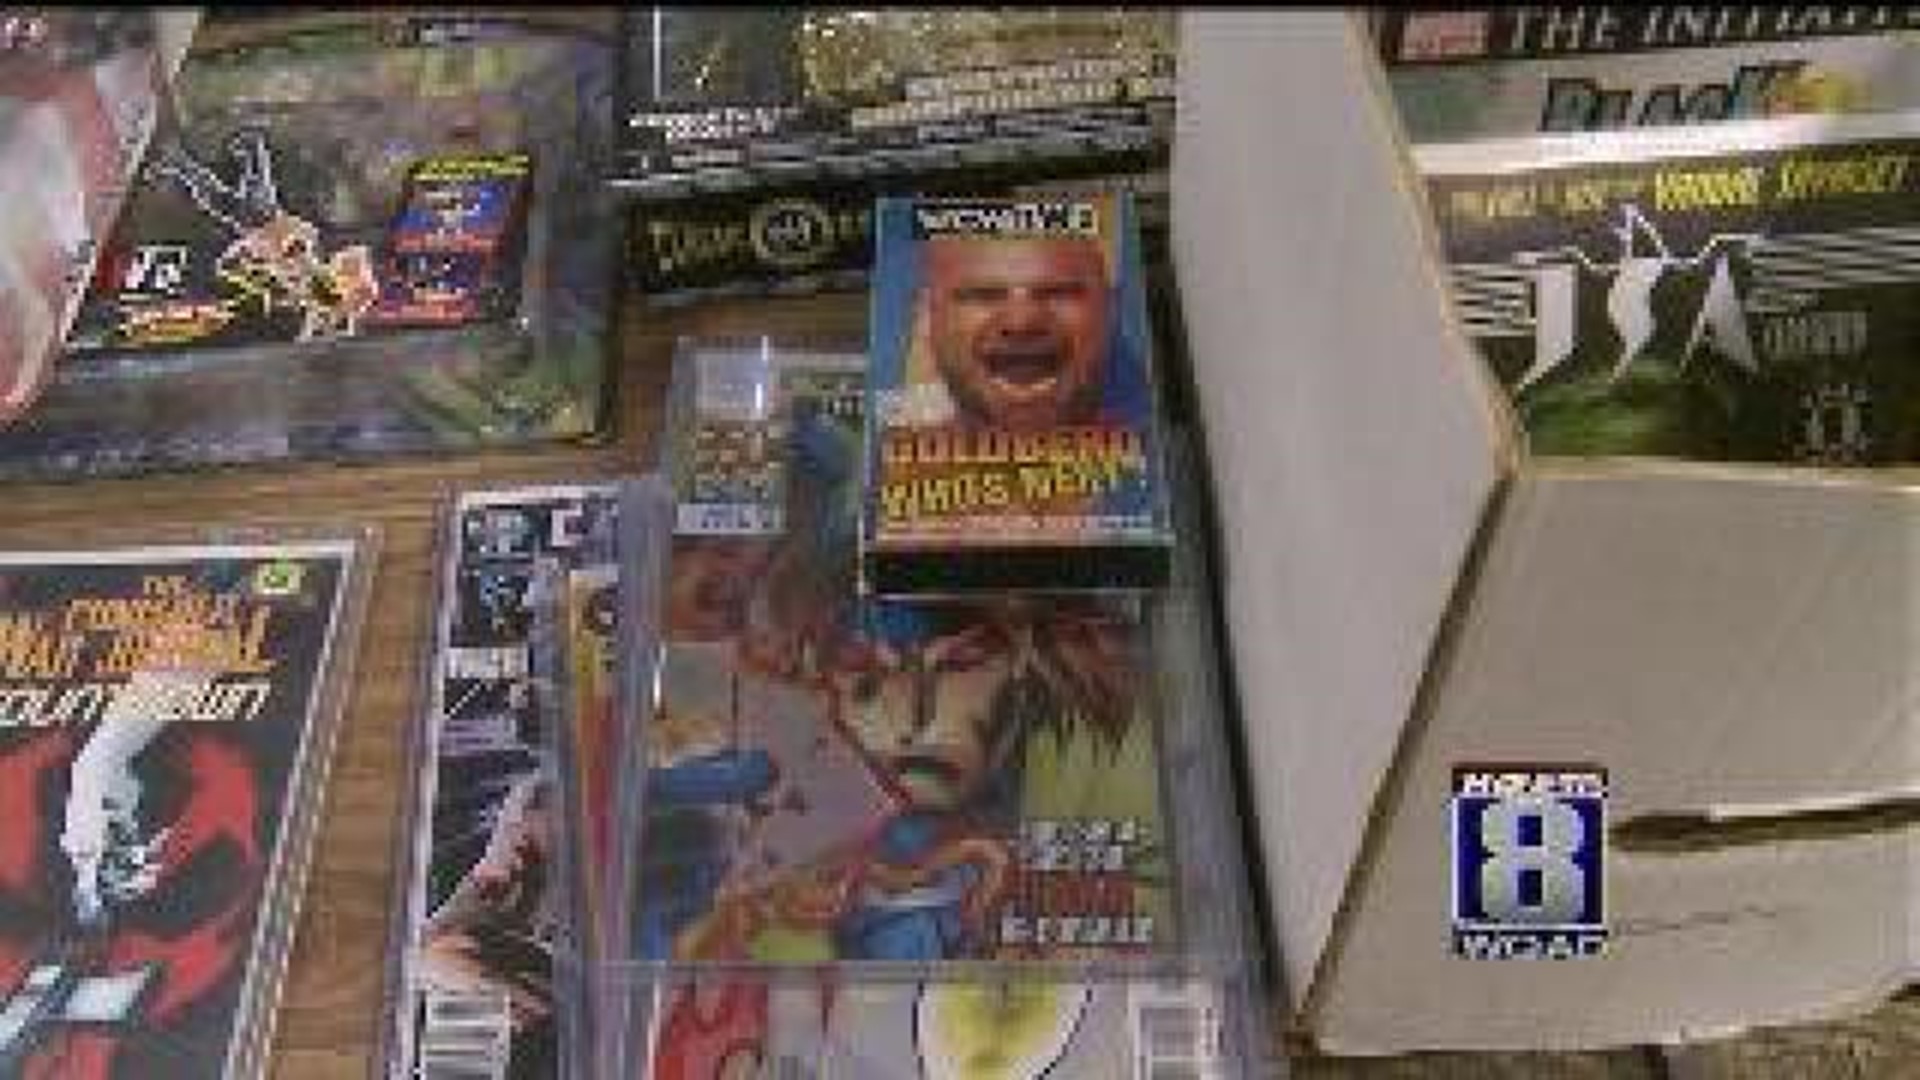 Collectors arrive for QC Comic Book Convention